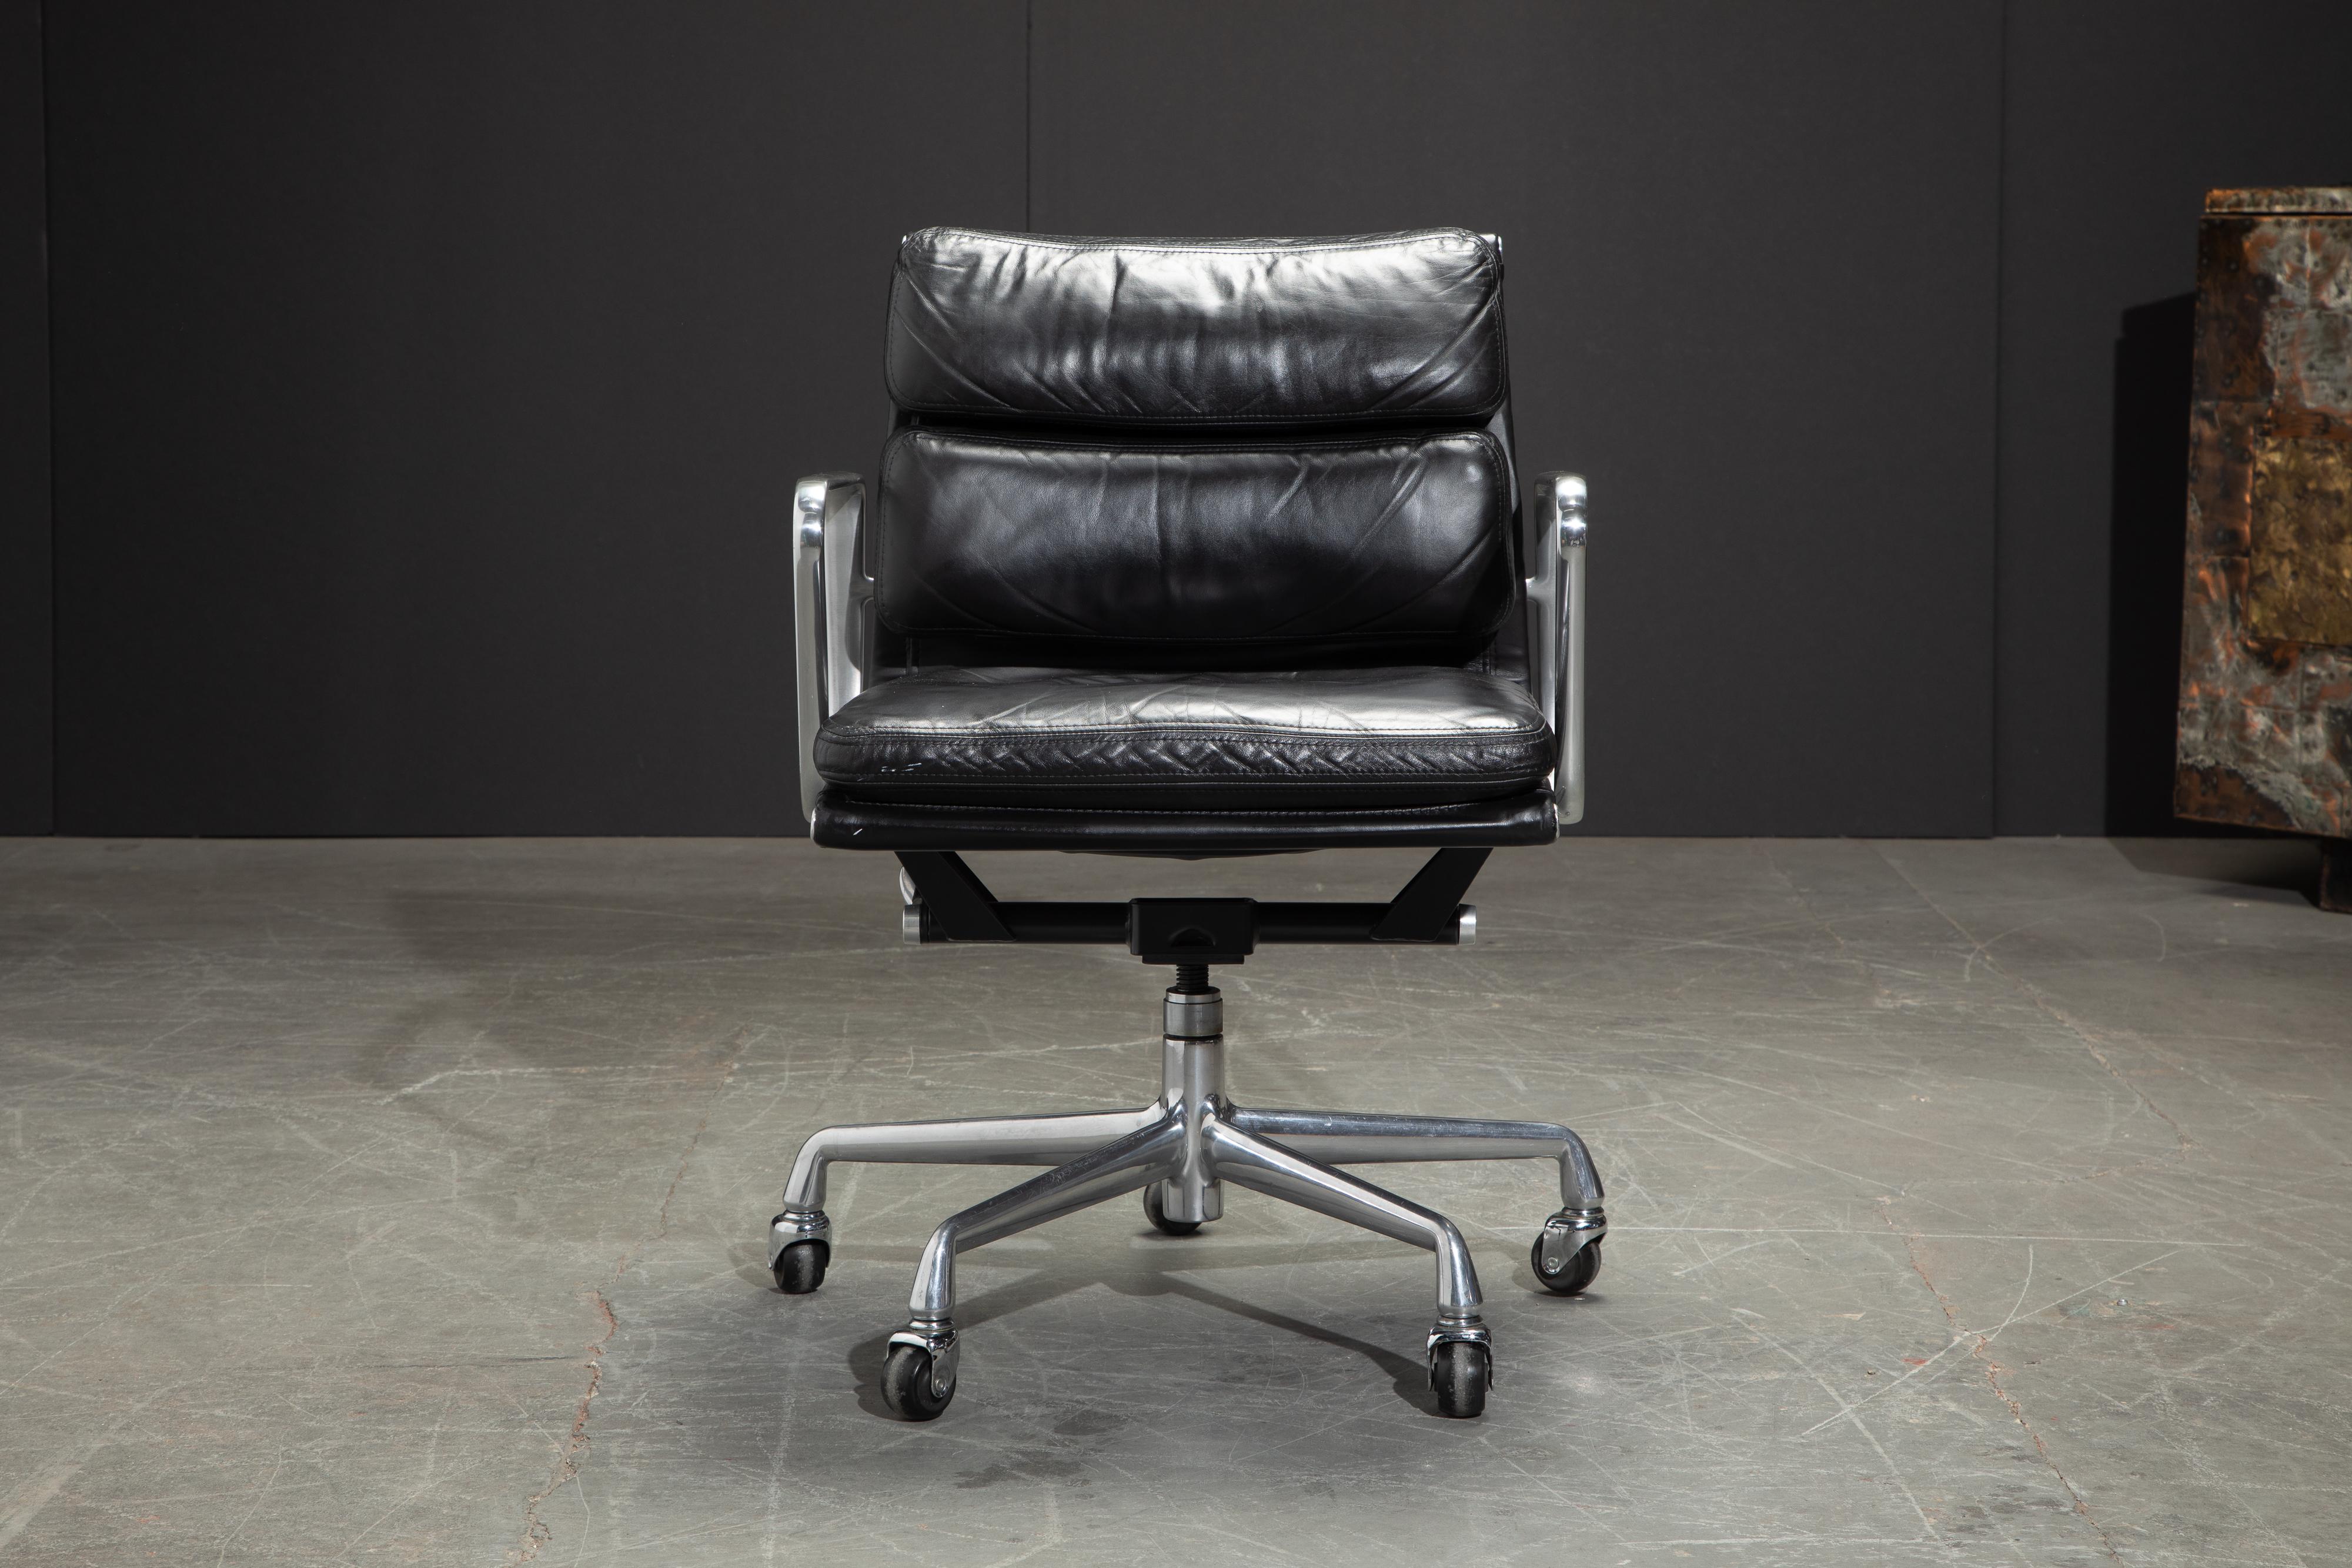 This sought after and in-demand black leather desk chair is the classic 'Soft Pad Management Chair' from the aluminum group line, designed by Charles and Ray Eames for Herman Miller. Featuring the original vintage black leather upholstery over